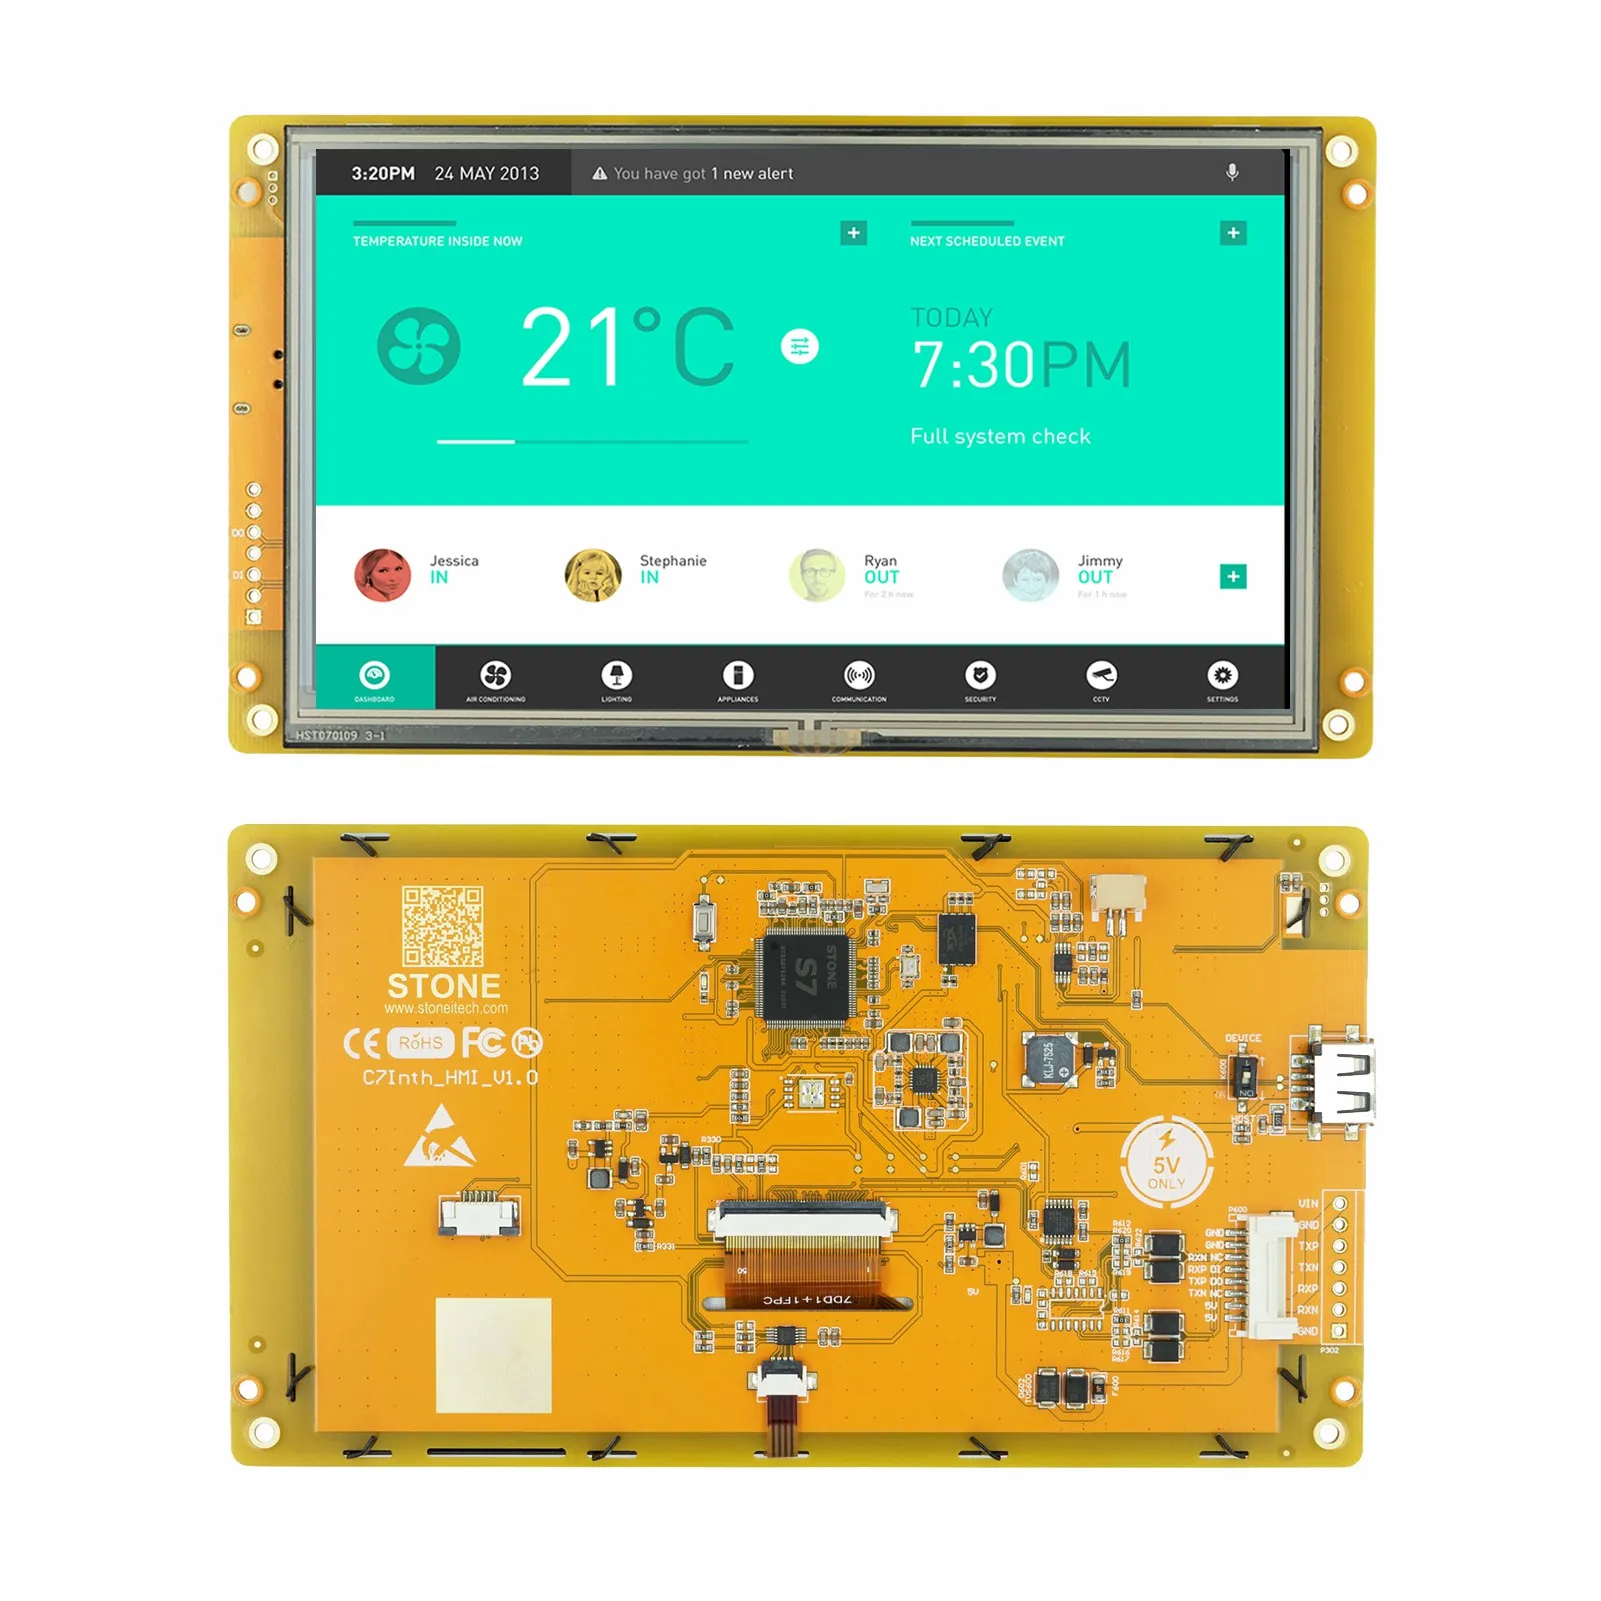 STONE 7.0 Inch Color HMI TFT  LCD  Display  with High Brightness And Software for Equipment Use